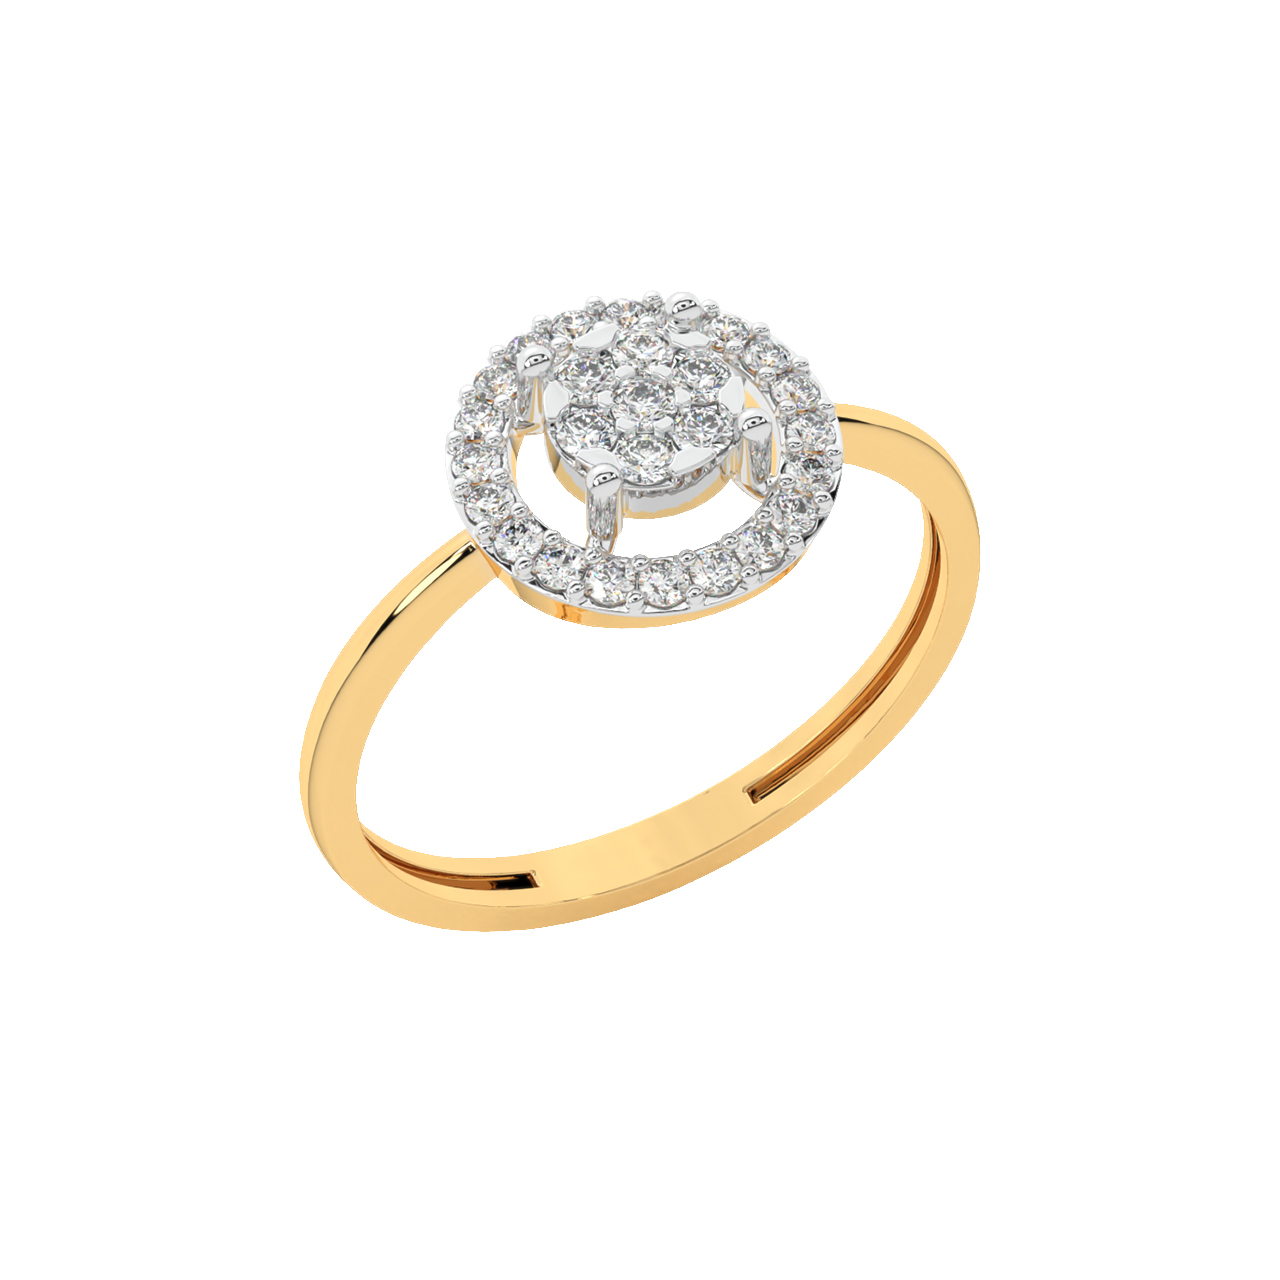 Buy Cocktail Rings Online in India | Sukkhi.com